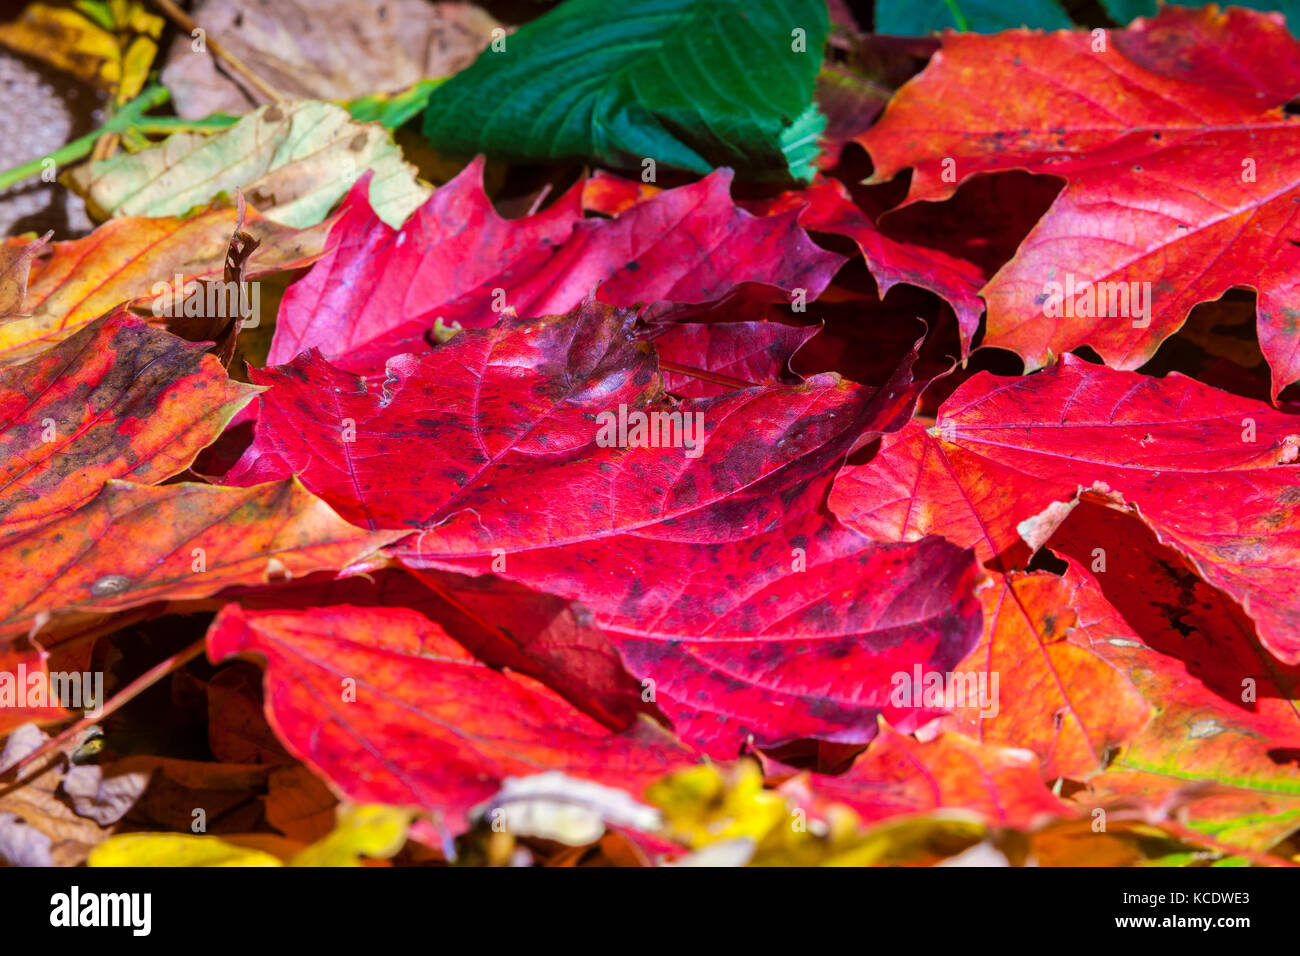 Autumn leaves photographed in a studio. Stock Photo